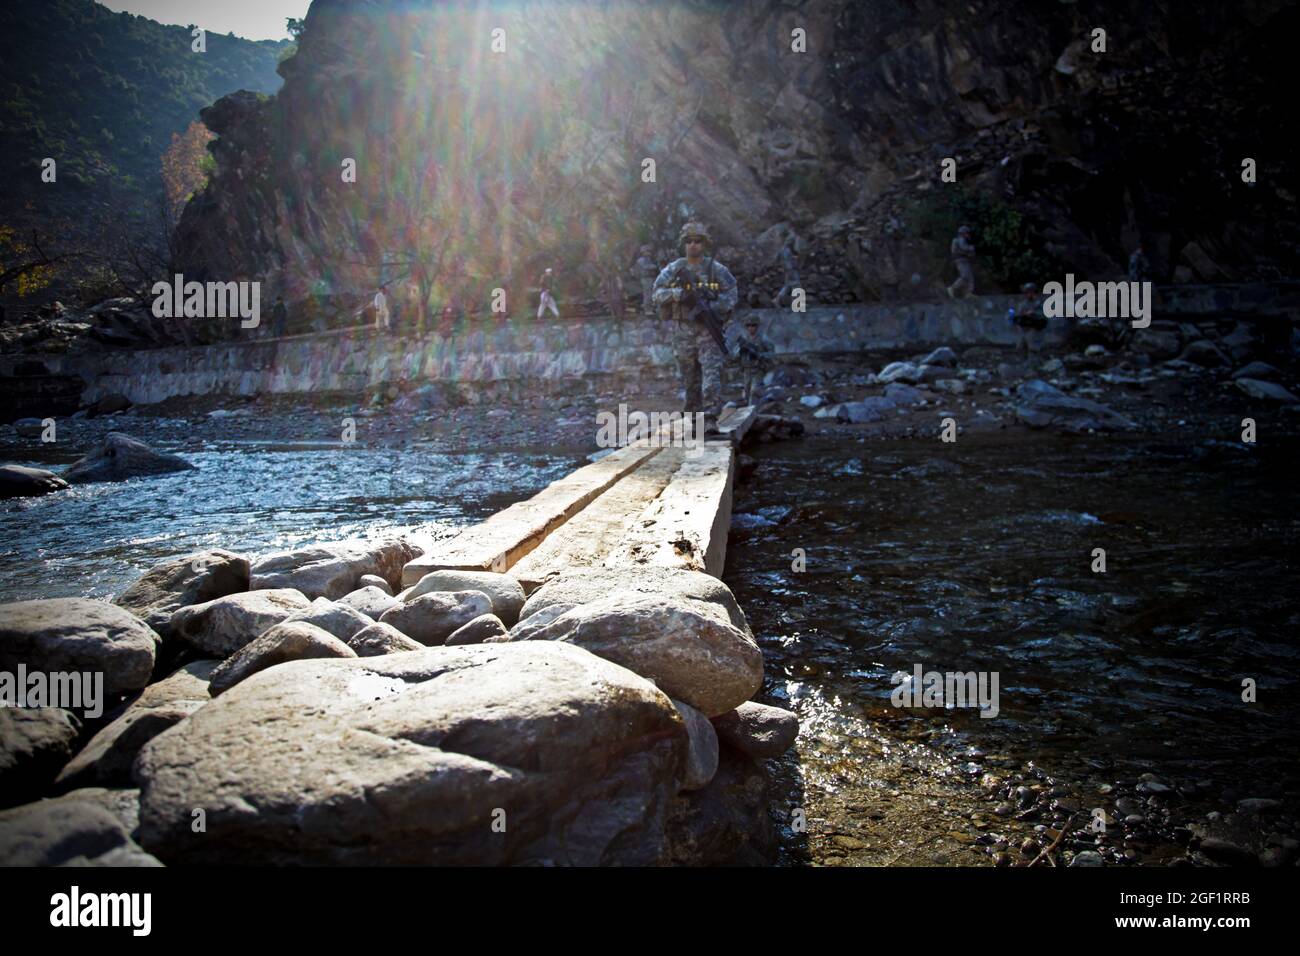 U.S. Army Soldiers assigned to Combat Company, 1st Battalion, 32nd Infantry Regiment, 3rd Brigade Combat Team, 10th Mountain Division, cross a river as they approach the village of Lachey in the Shigal district of Kunar province, Afghanistan on Dec. 7. Stock Photo